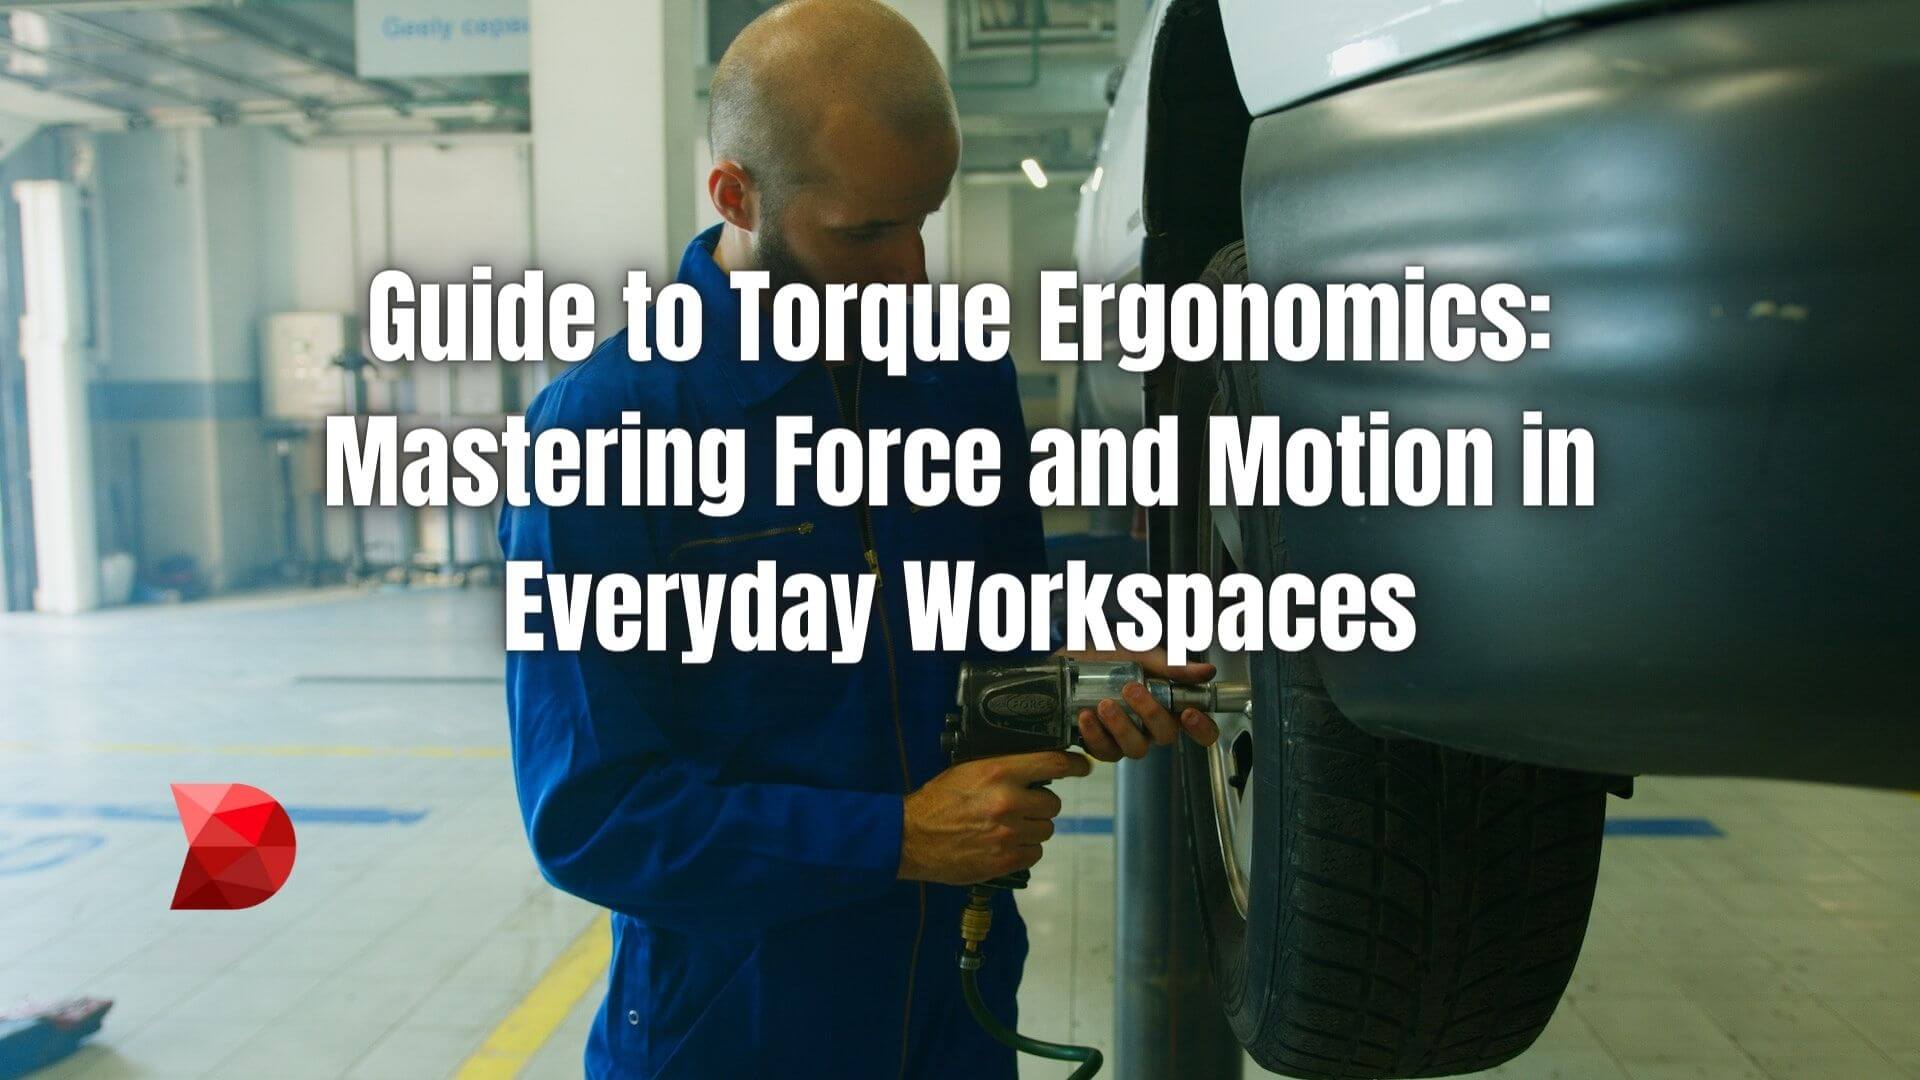 Torque Ergonomics studies the application of force in rotational systems such as air wrenches and nut runners. Click here to learn more!